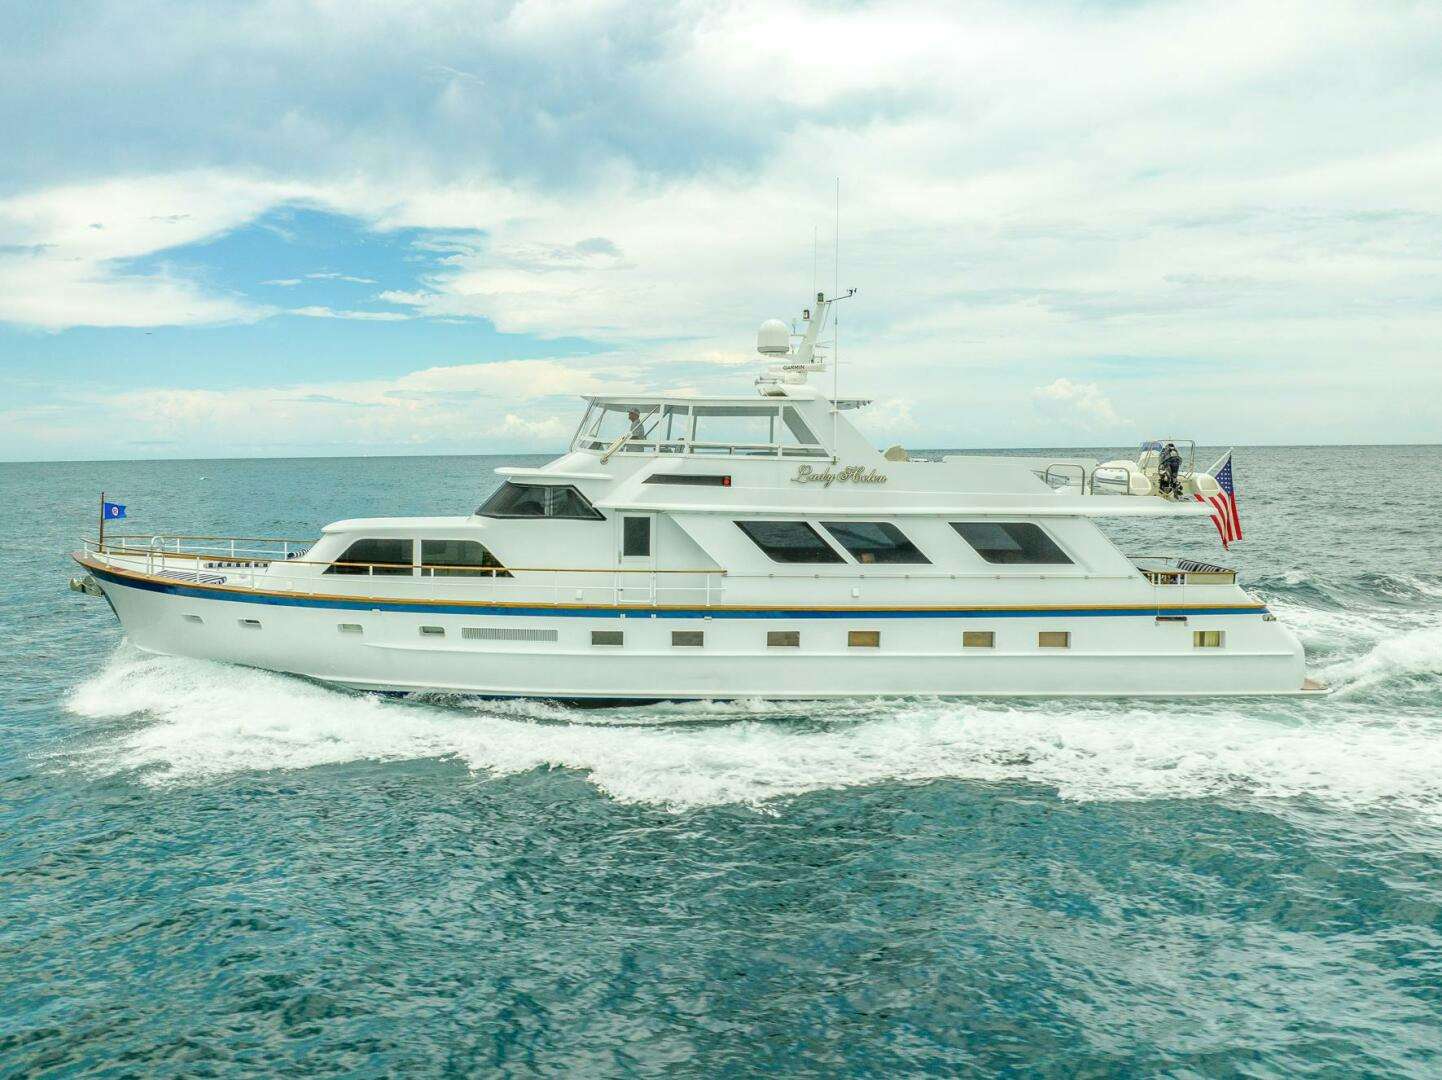 Lady helen
Yacht for Sale